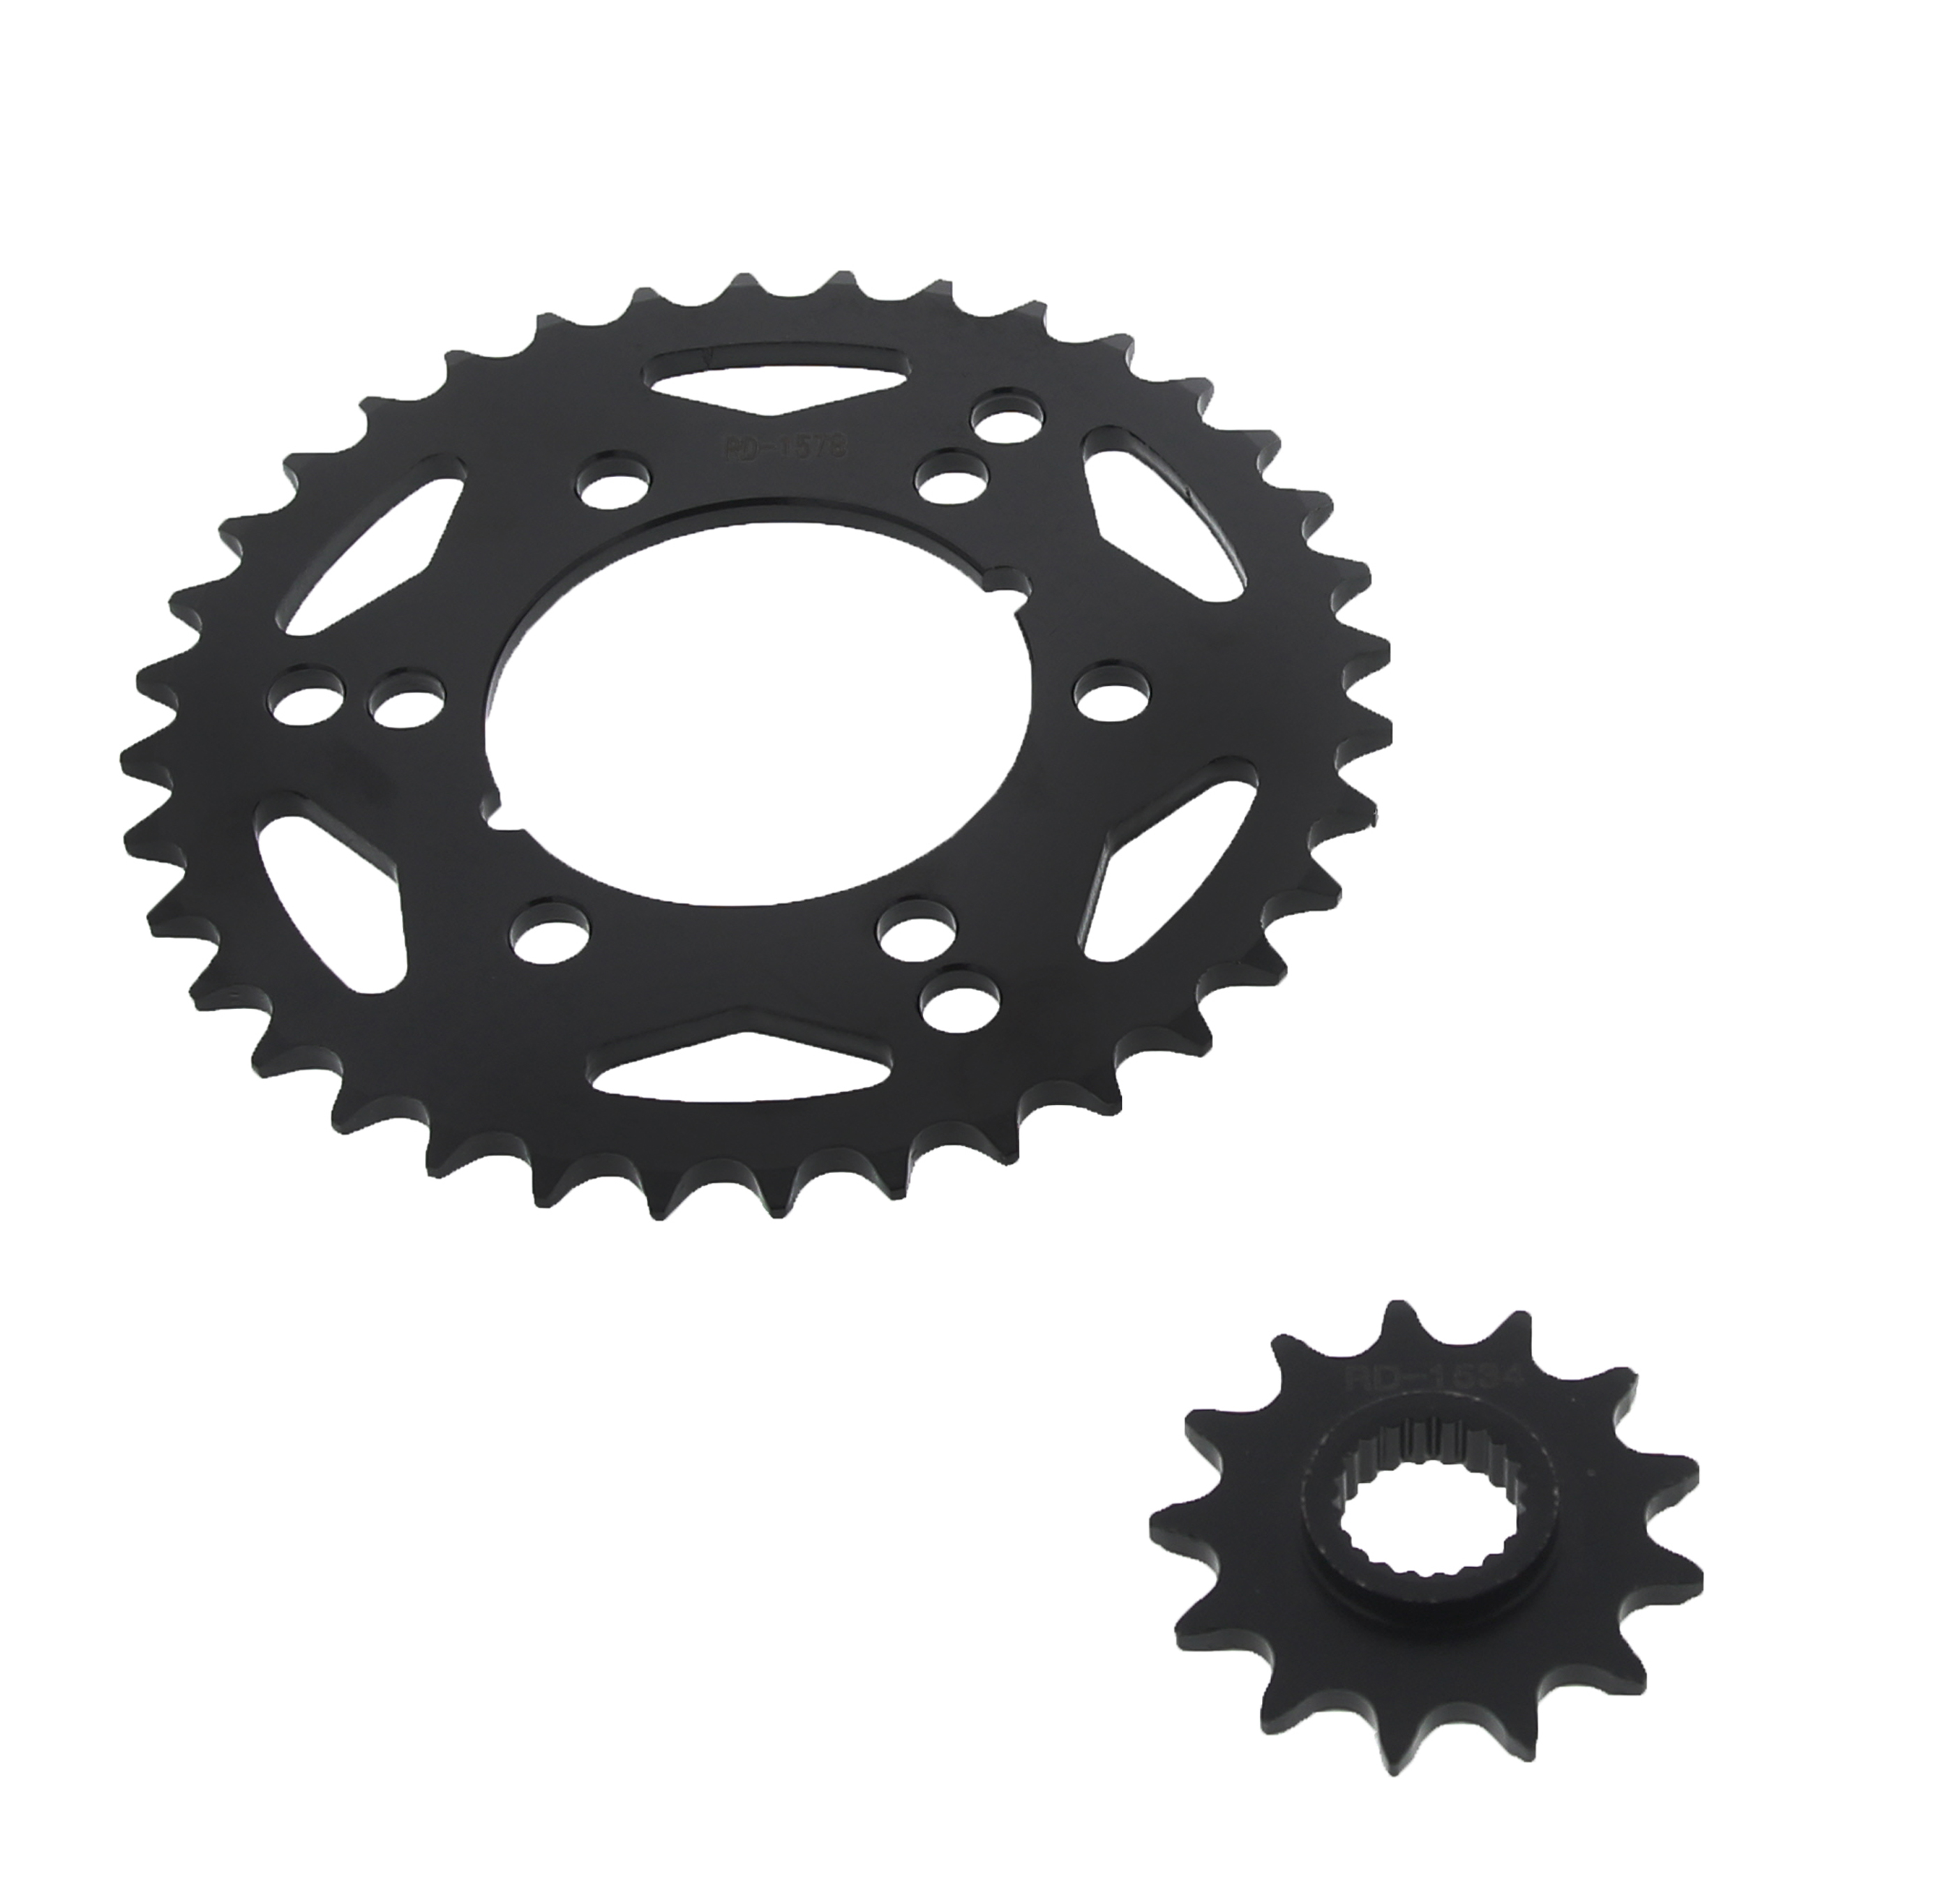 520-76L O-Ring Chain and Sprocket 13//36 for 1998-2009 Polaris Scrambler 500 4X4